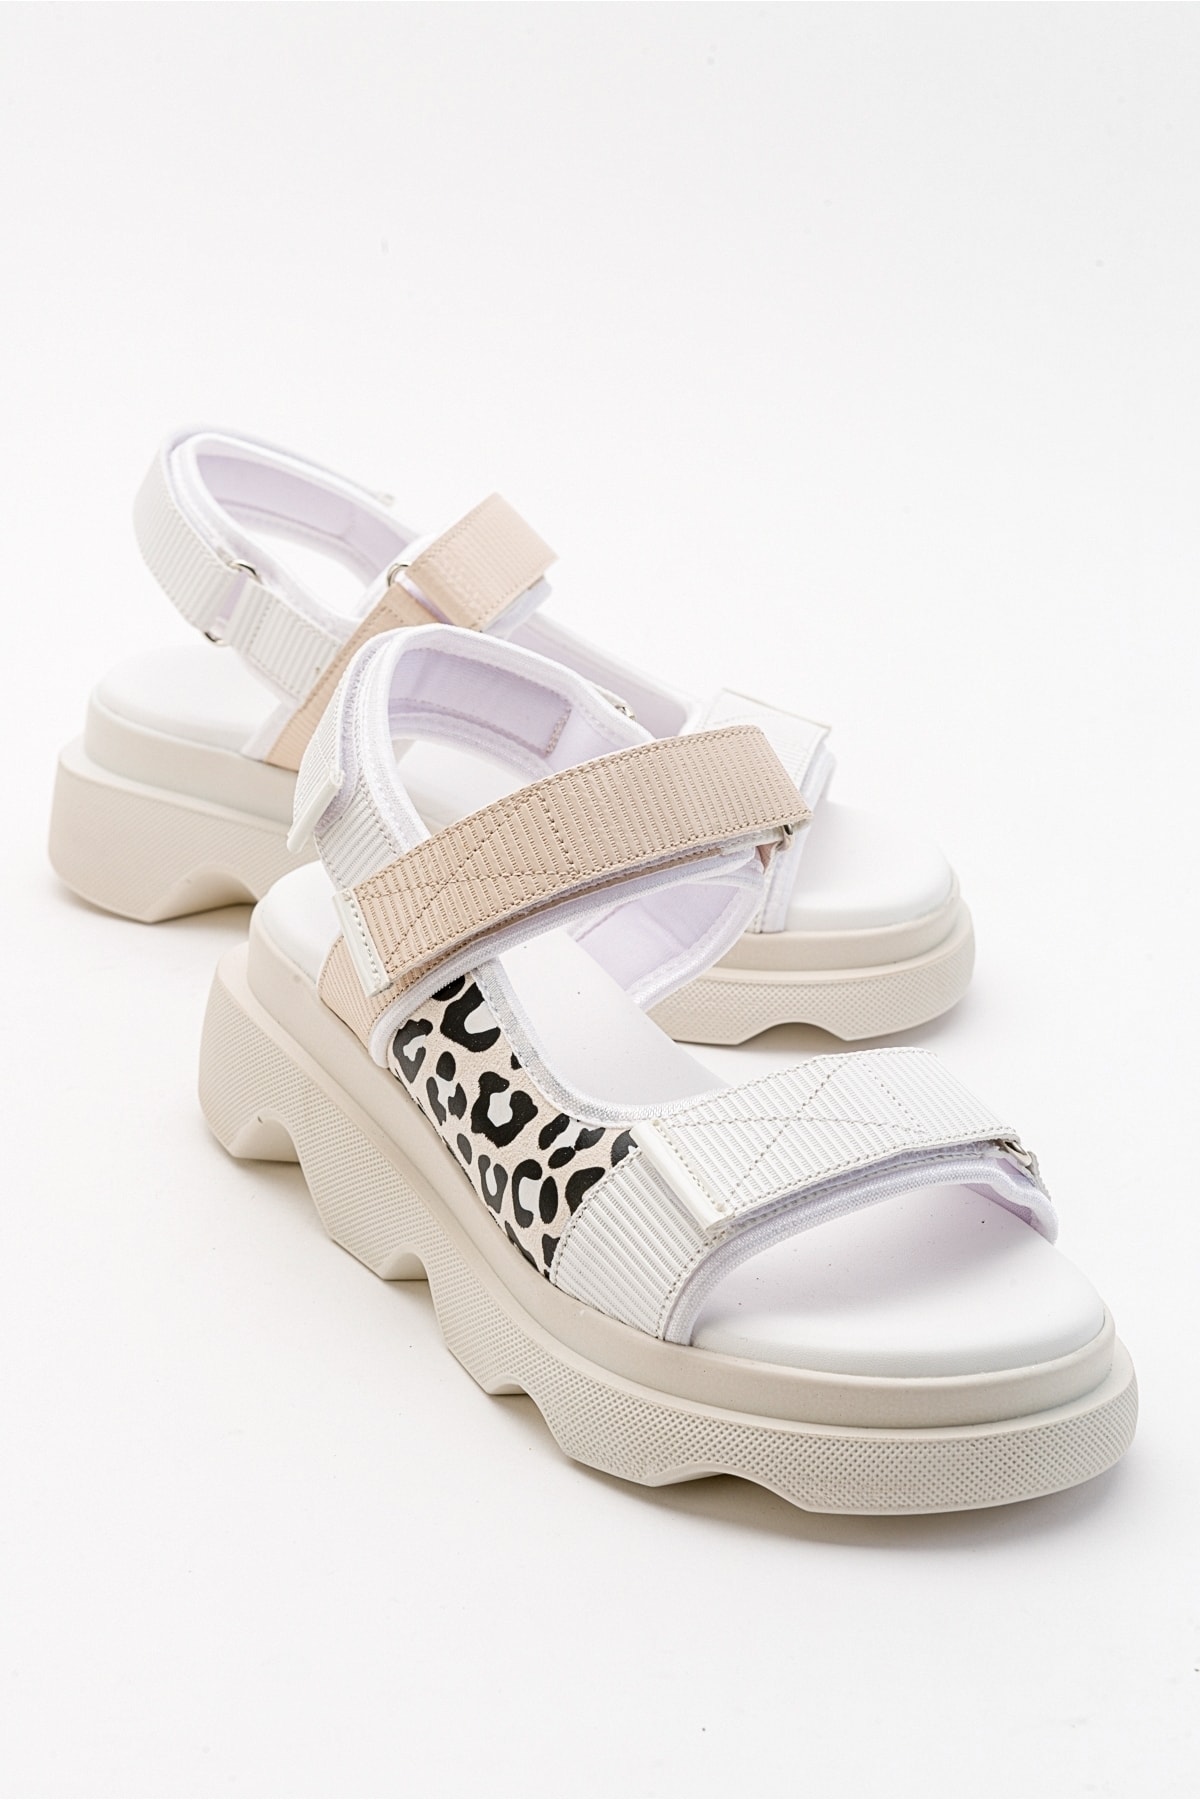 LuviShoes Tedy Women's White Patterned Sandals